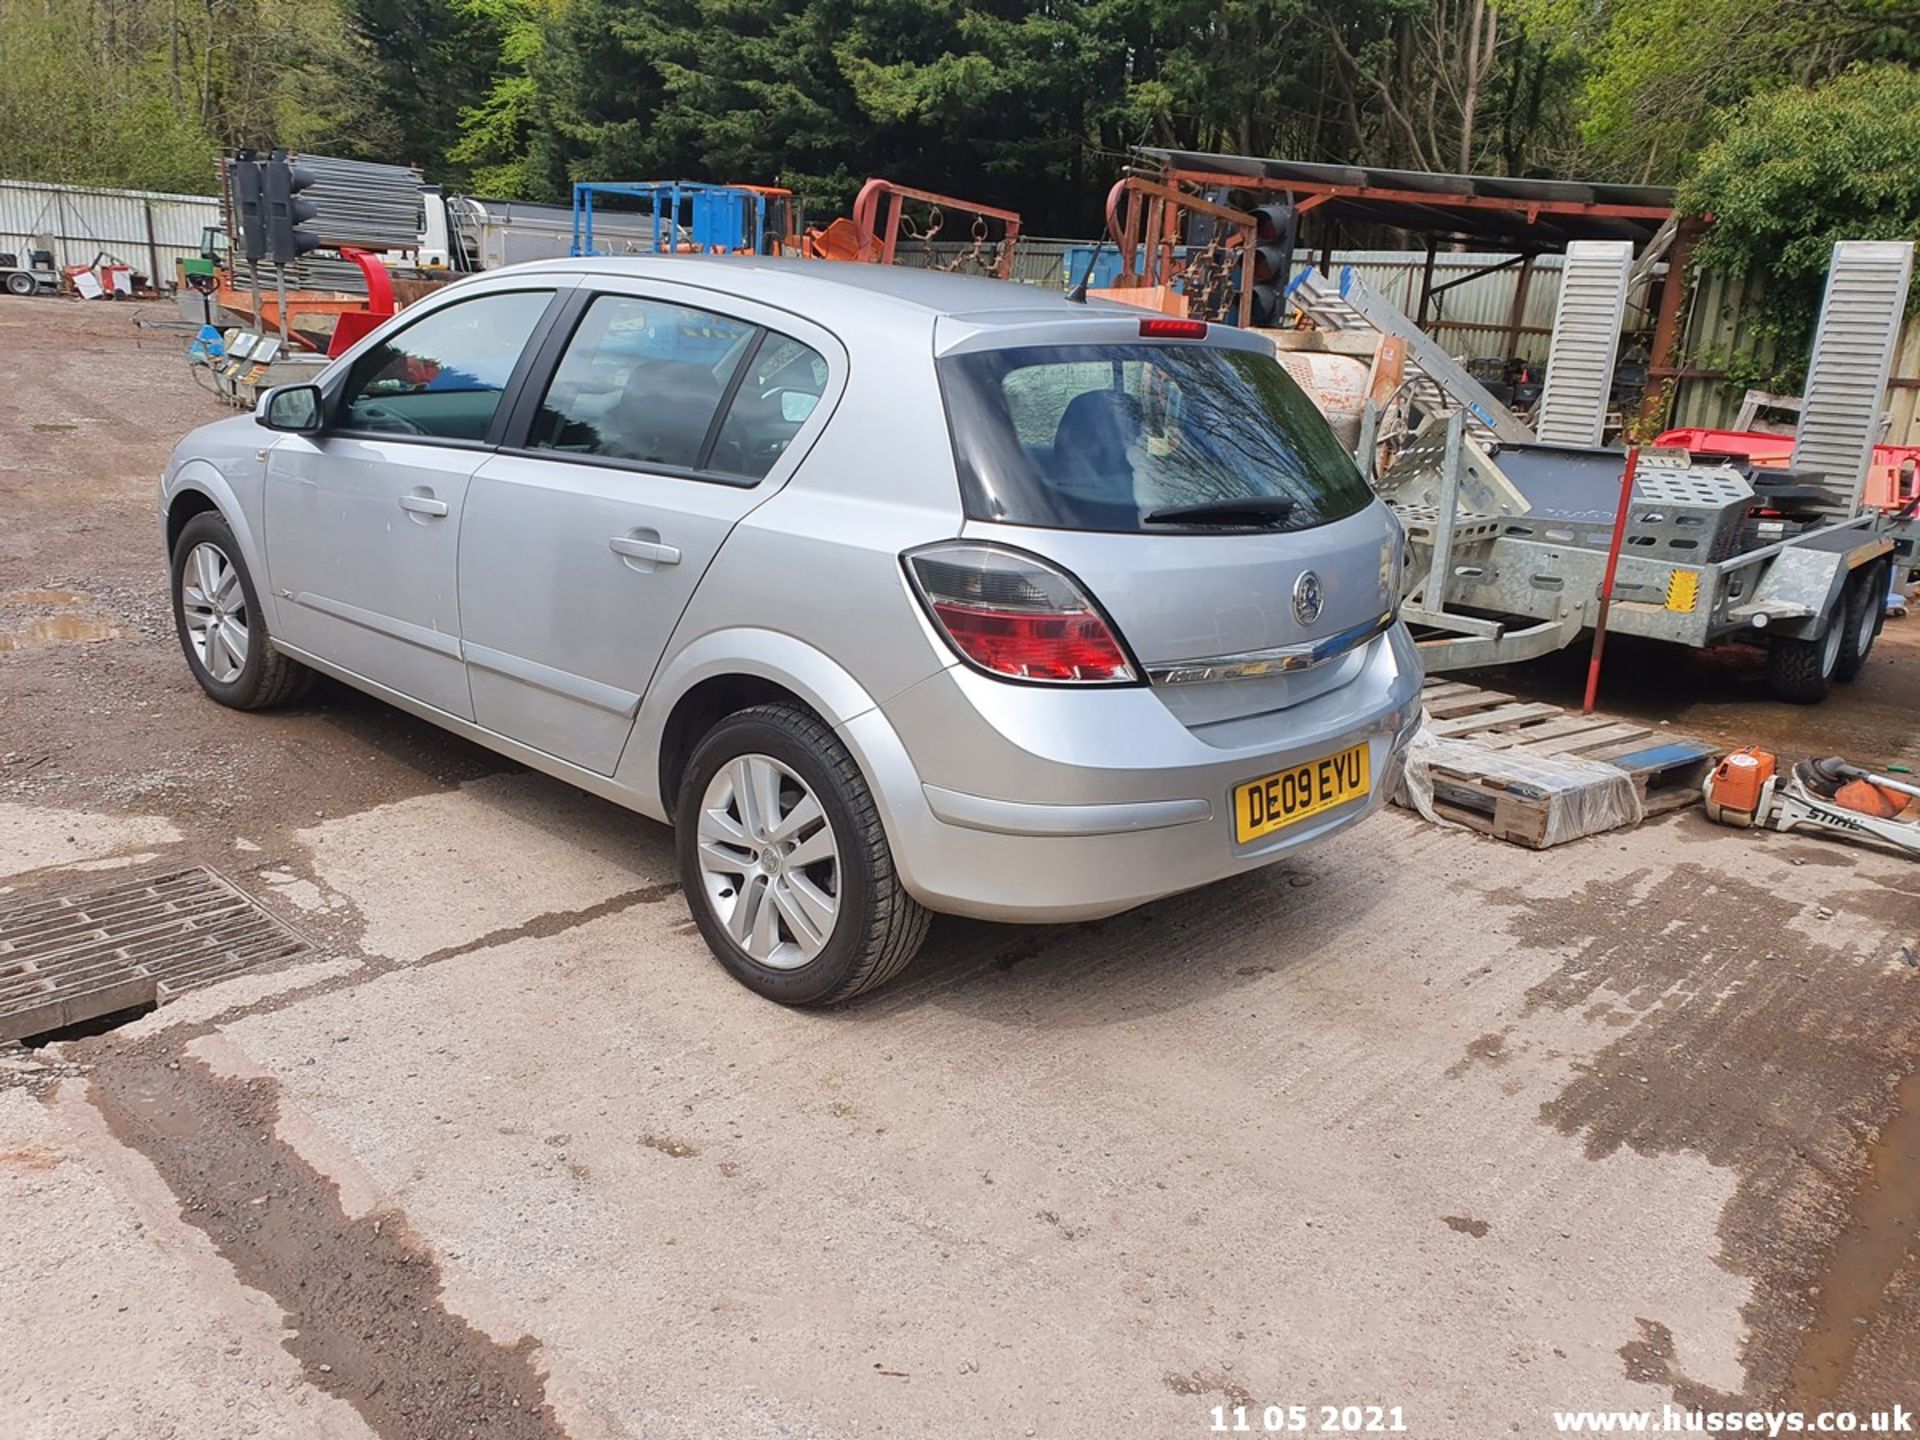 09/09 VAUXHALL ASTRA SXI TWINPORT - 1364cc 5dr Hatchback (Silver, 101k) - Image 5 of 13